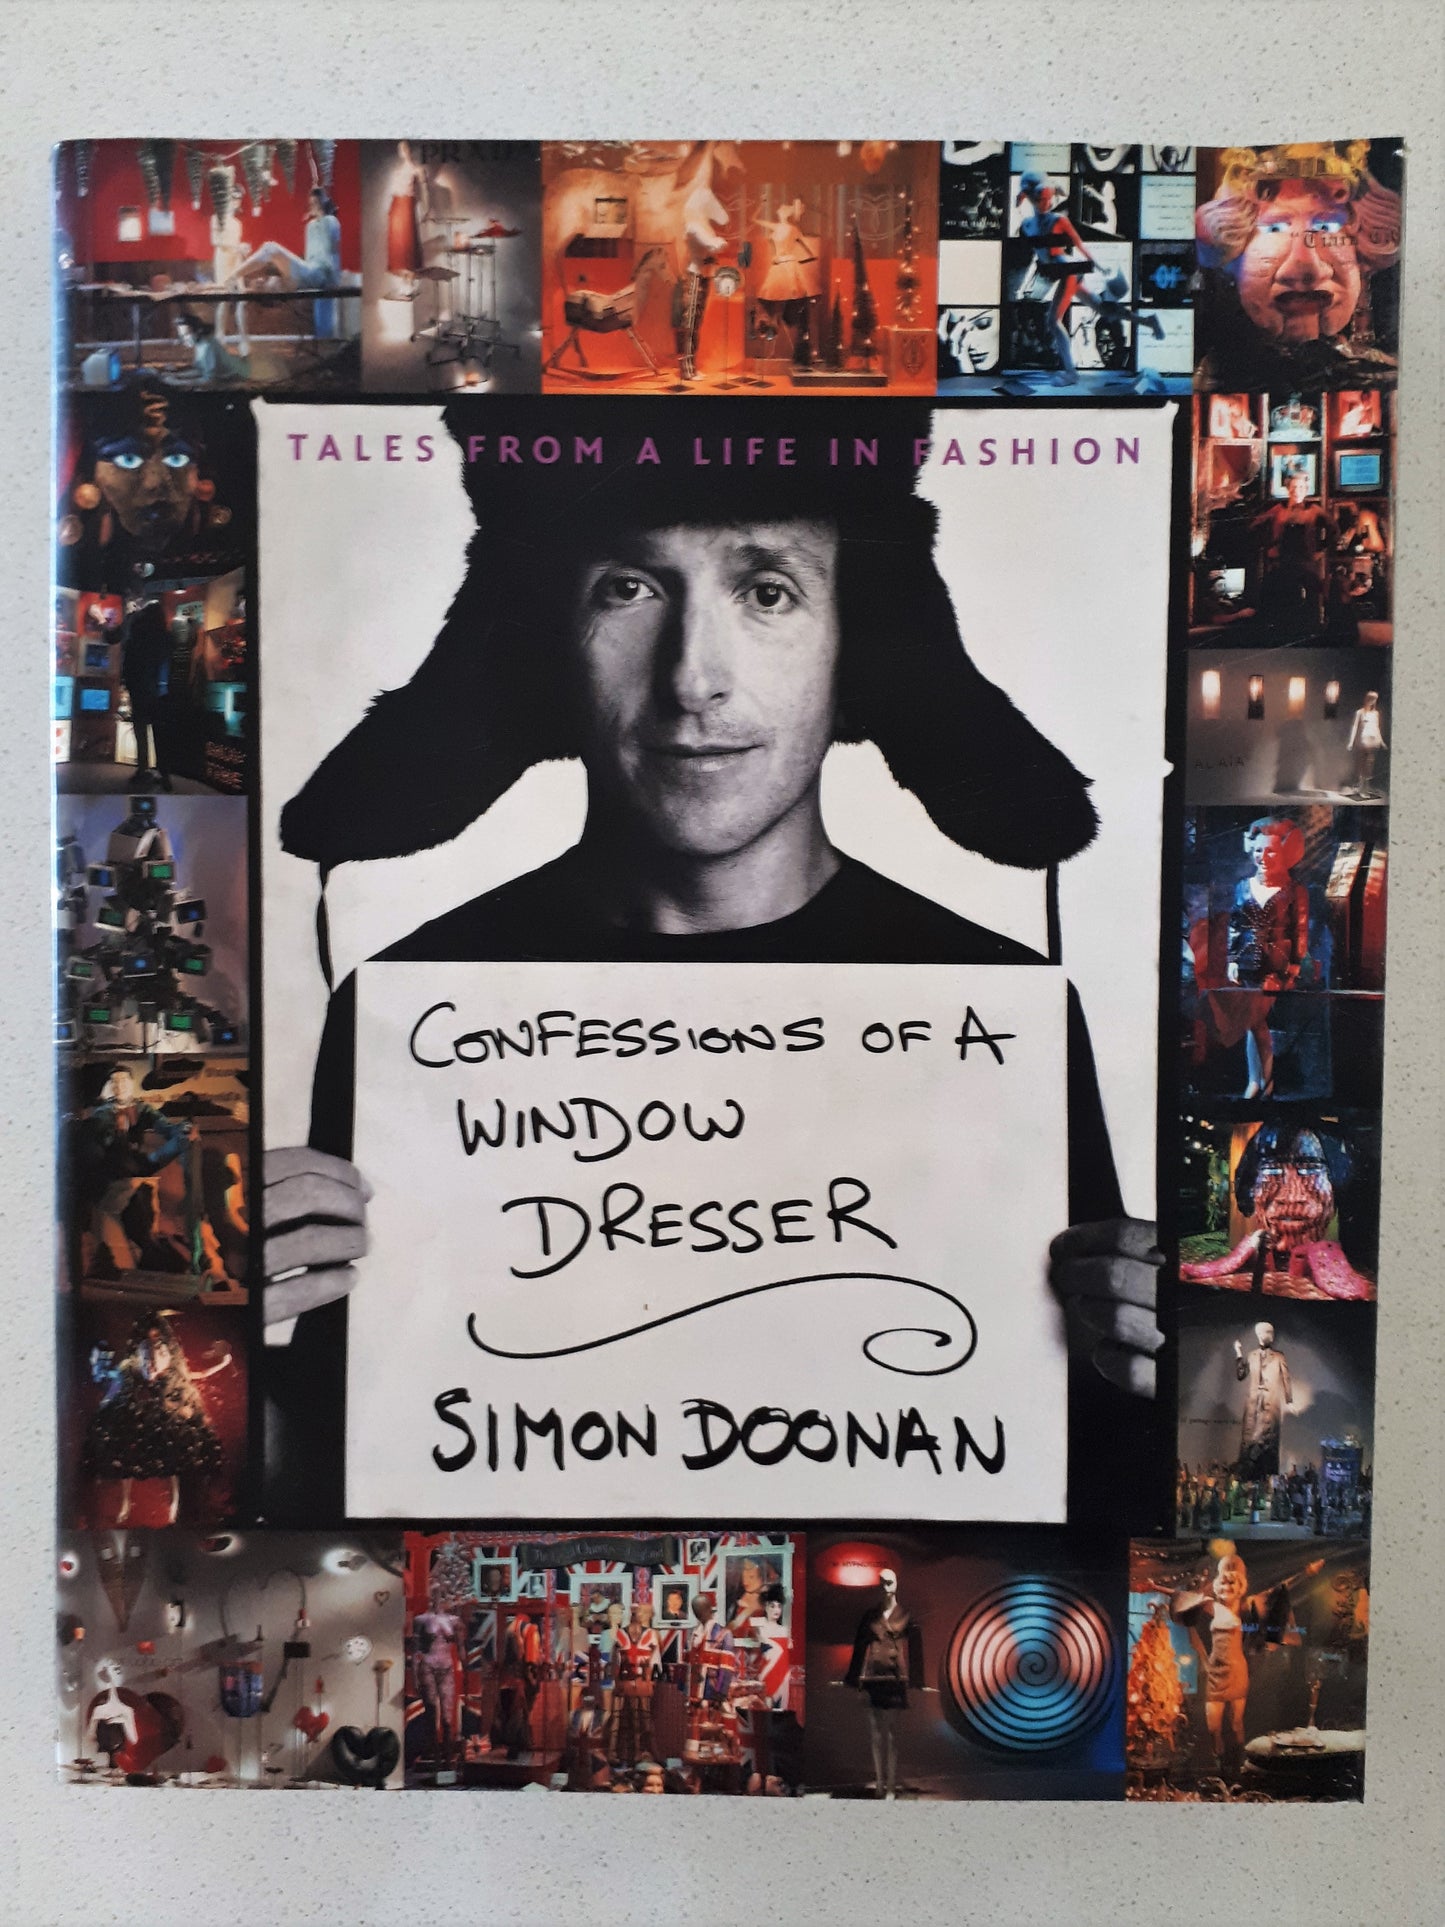 Confessions of a Window Dresser by Simon Doonan